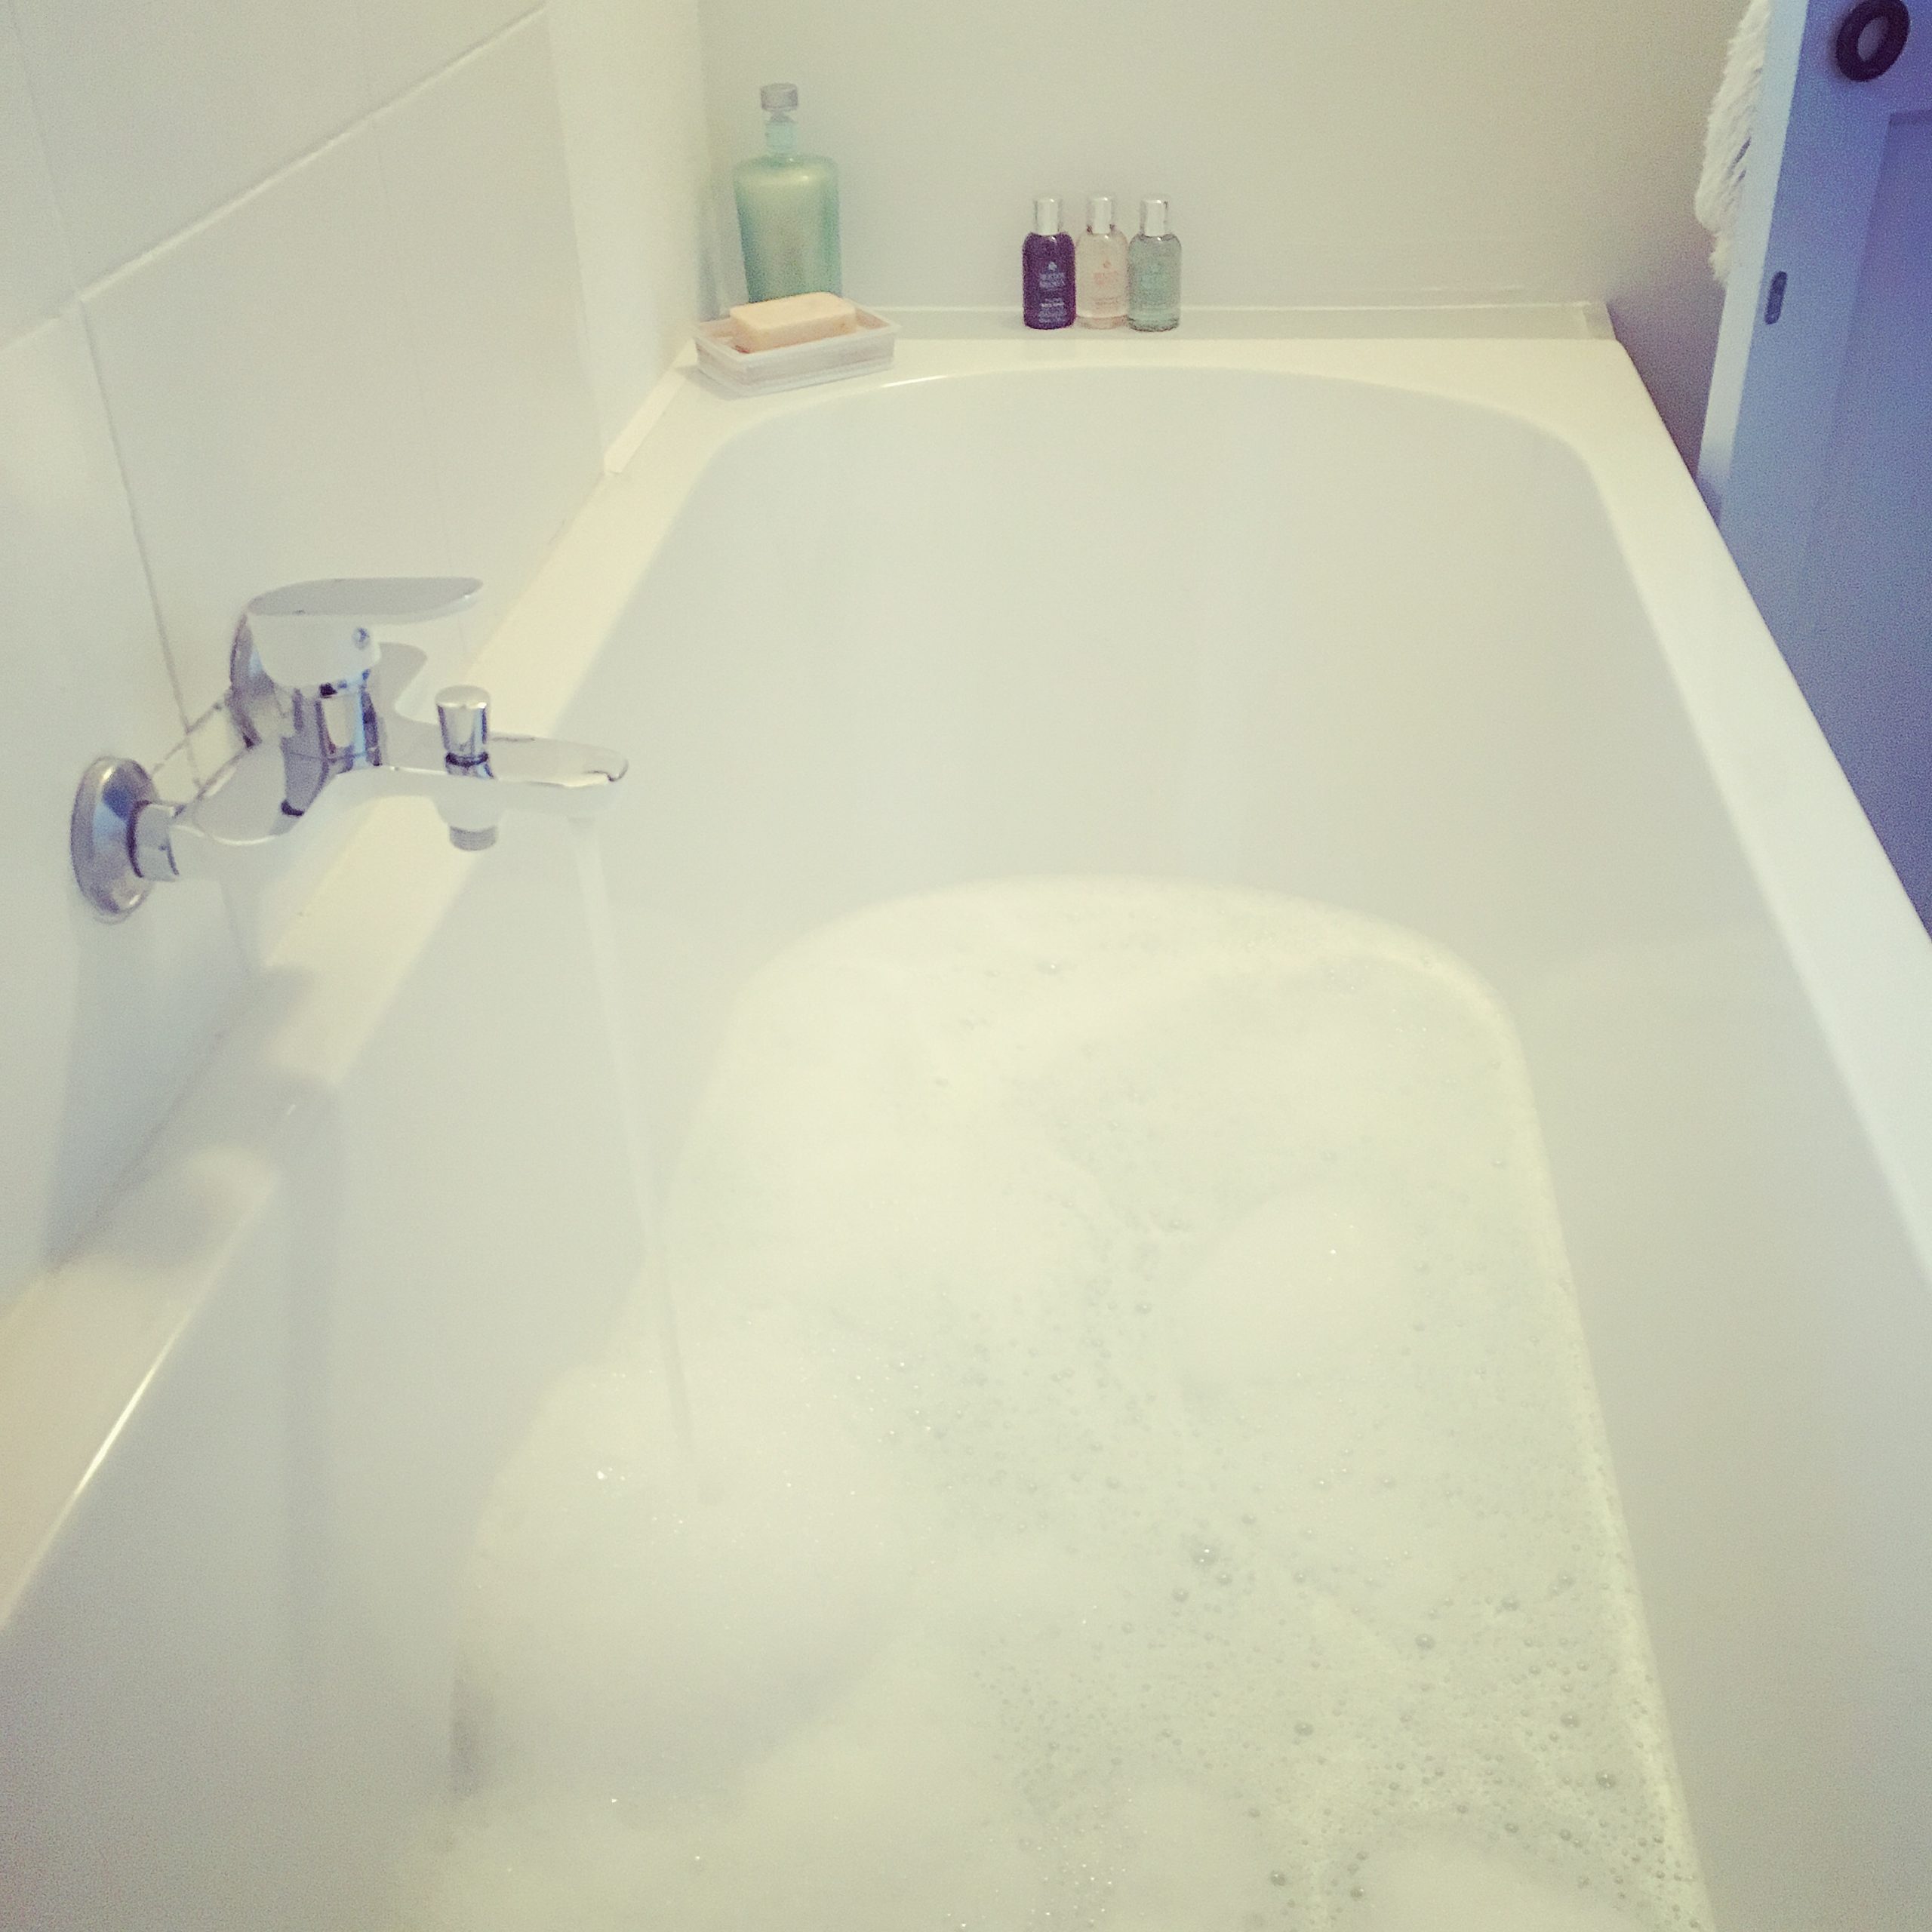 The luxury of finally filling a large bath...